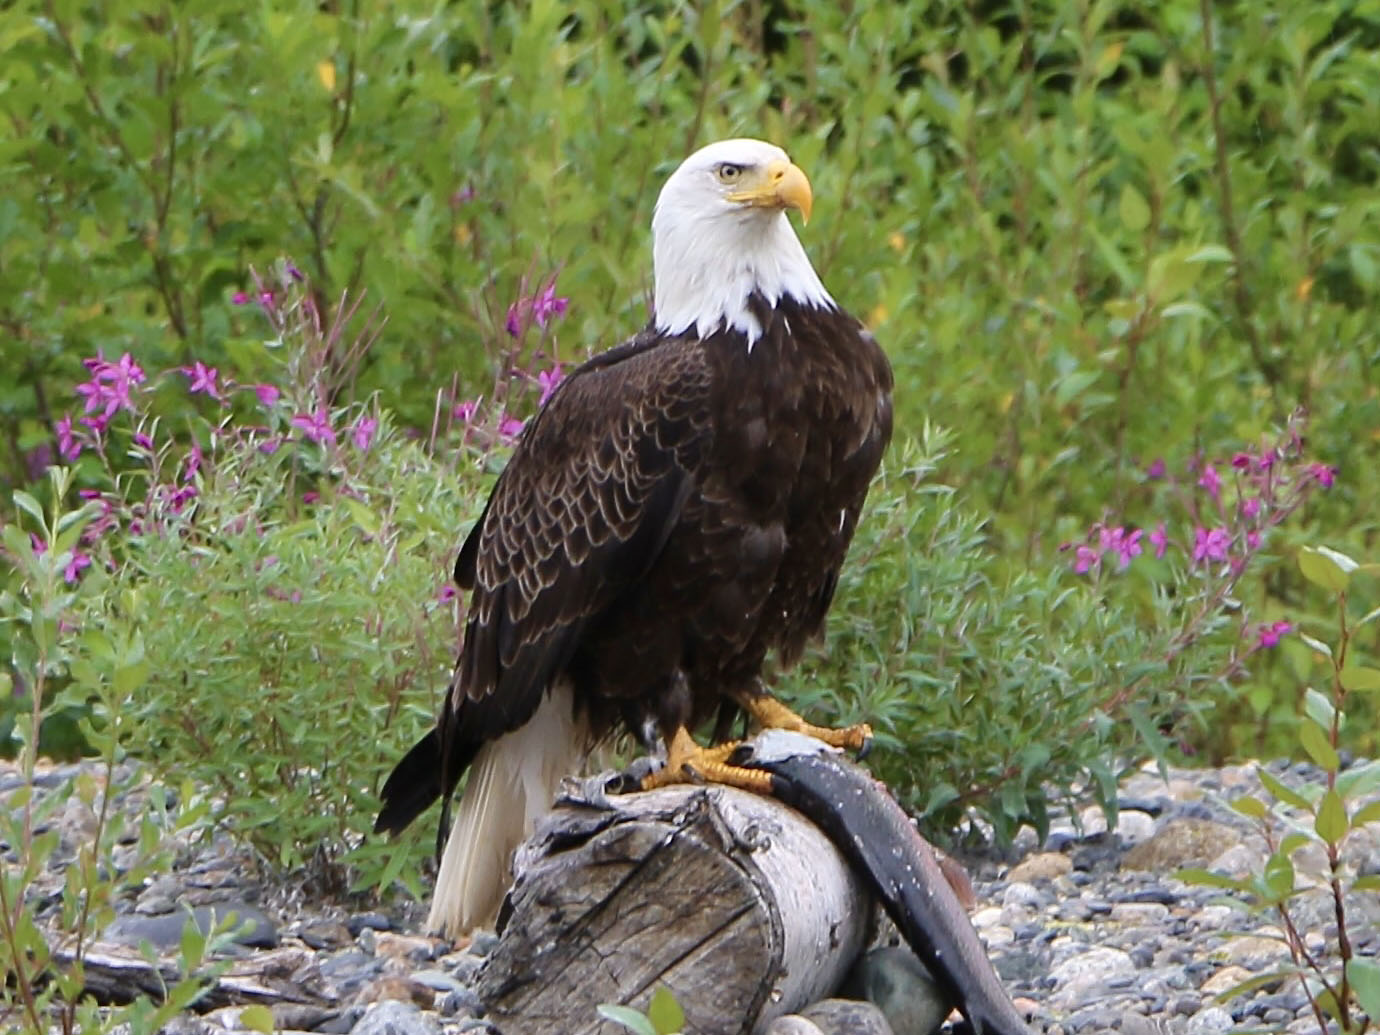 Eagle feeds on fresh fish caught from Willow Creek in Alaska during a guided Alaska Rafting Tour